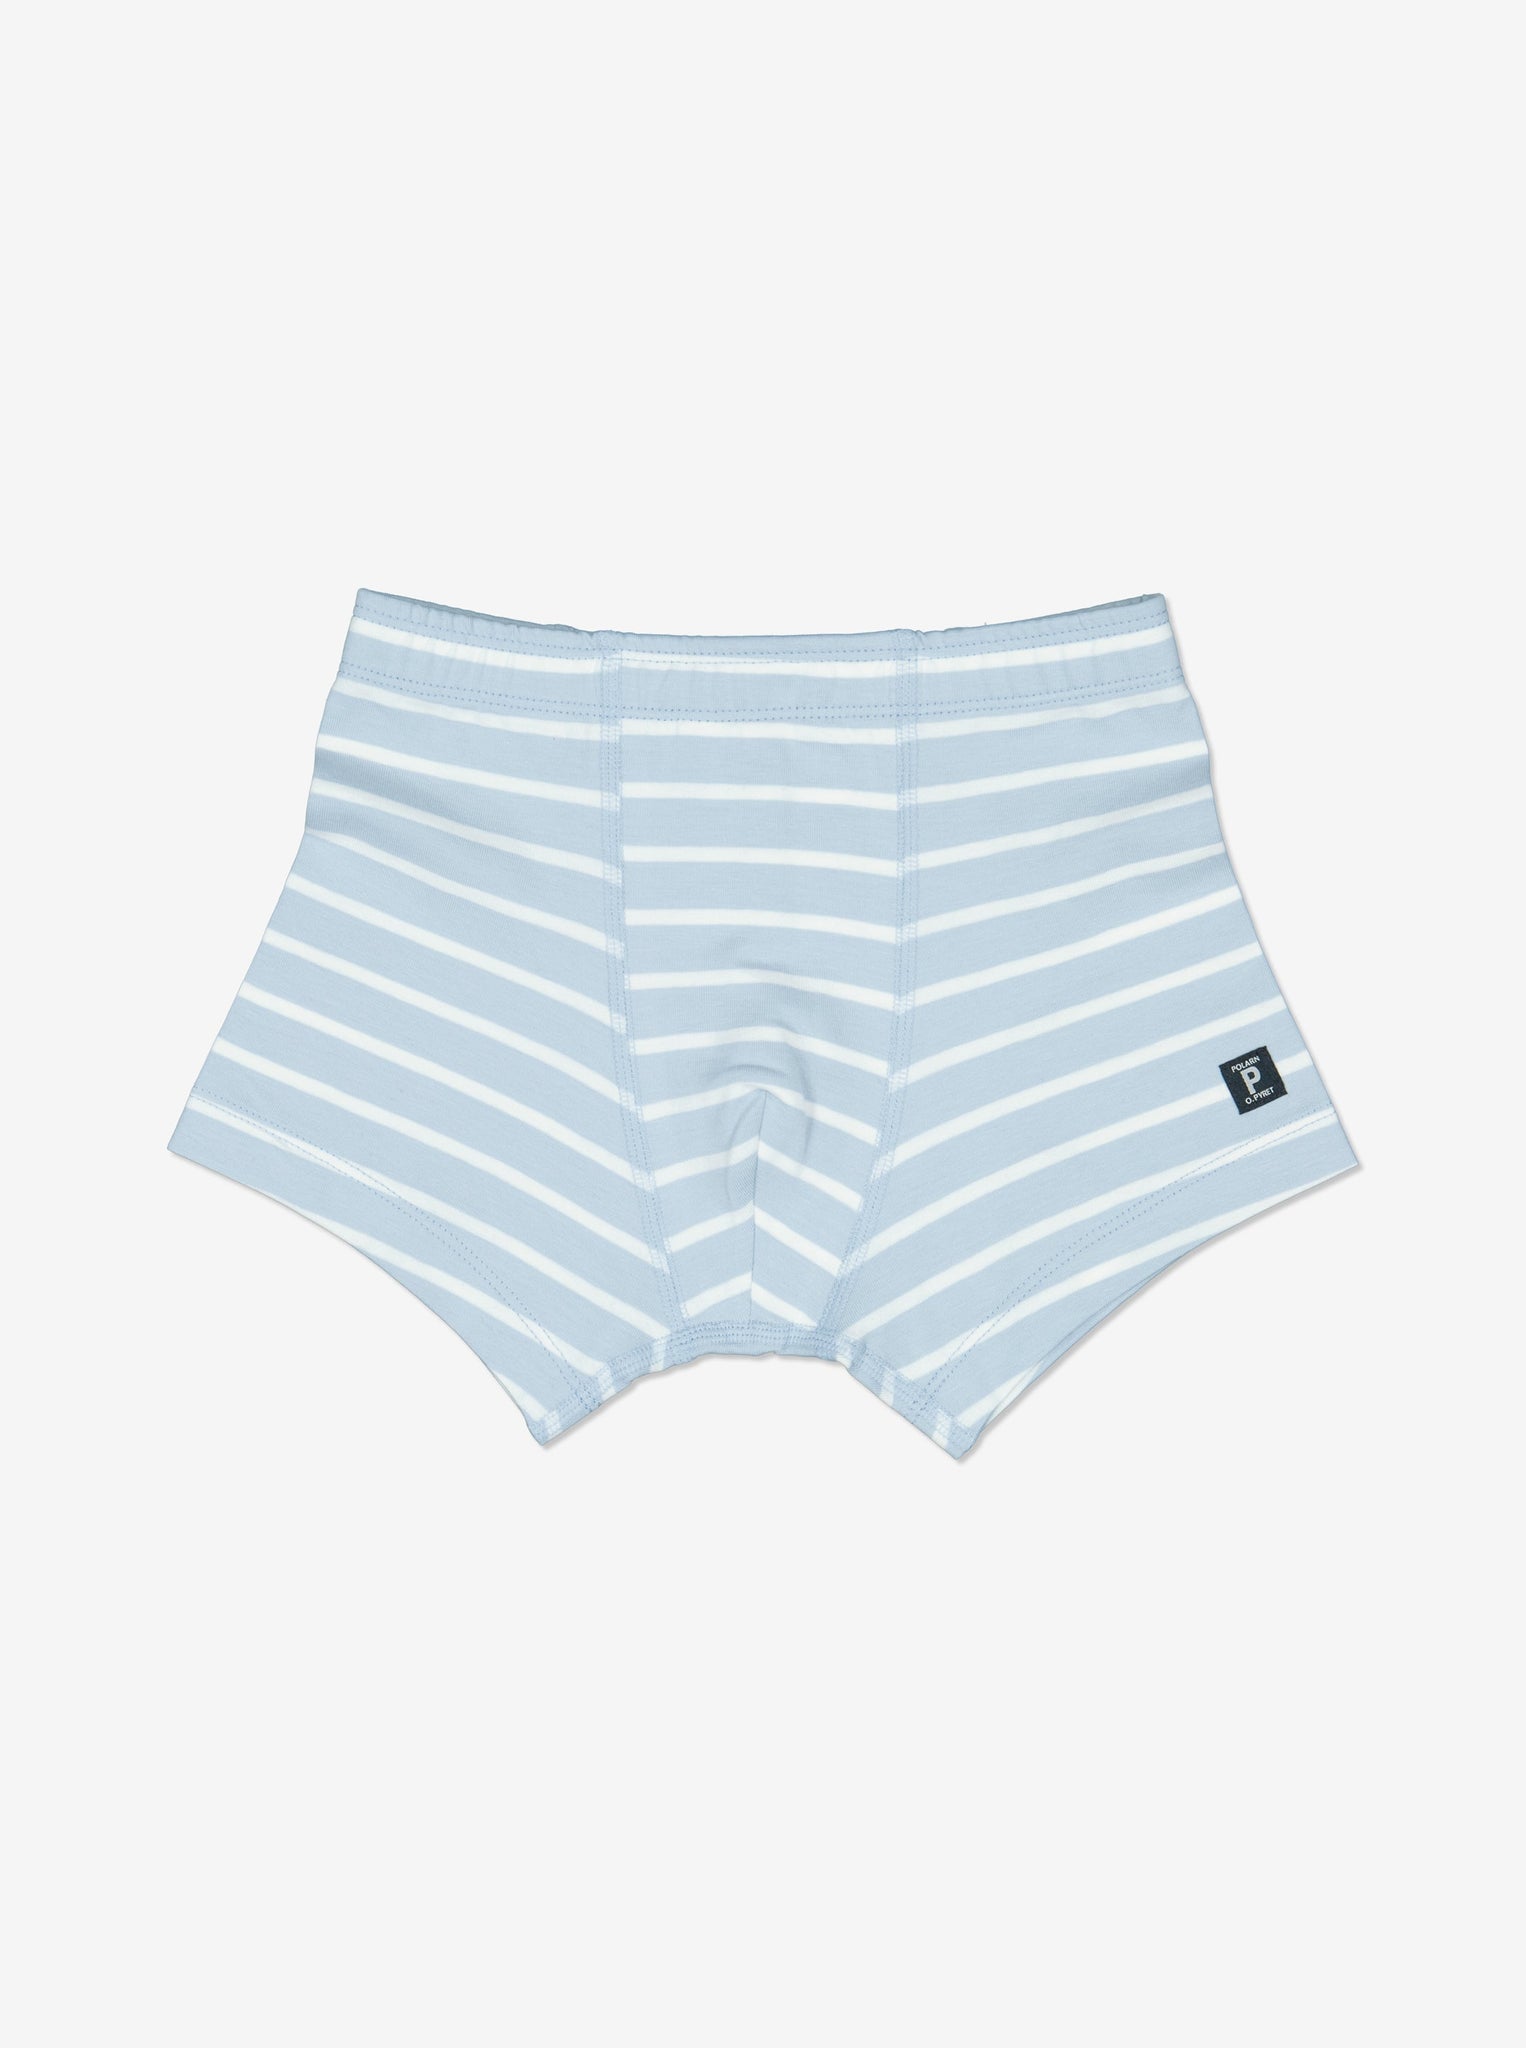 Organic Cotton Blue Boys Boxers from Polarn O. Pyret Kidswear. Made using sustainable sourced materials.